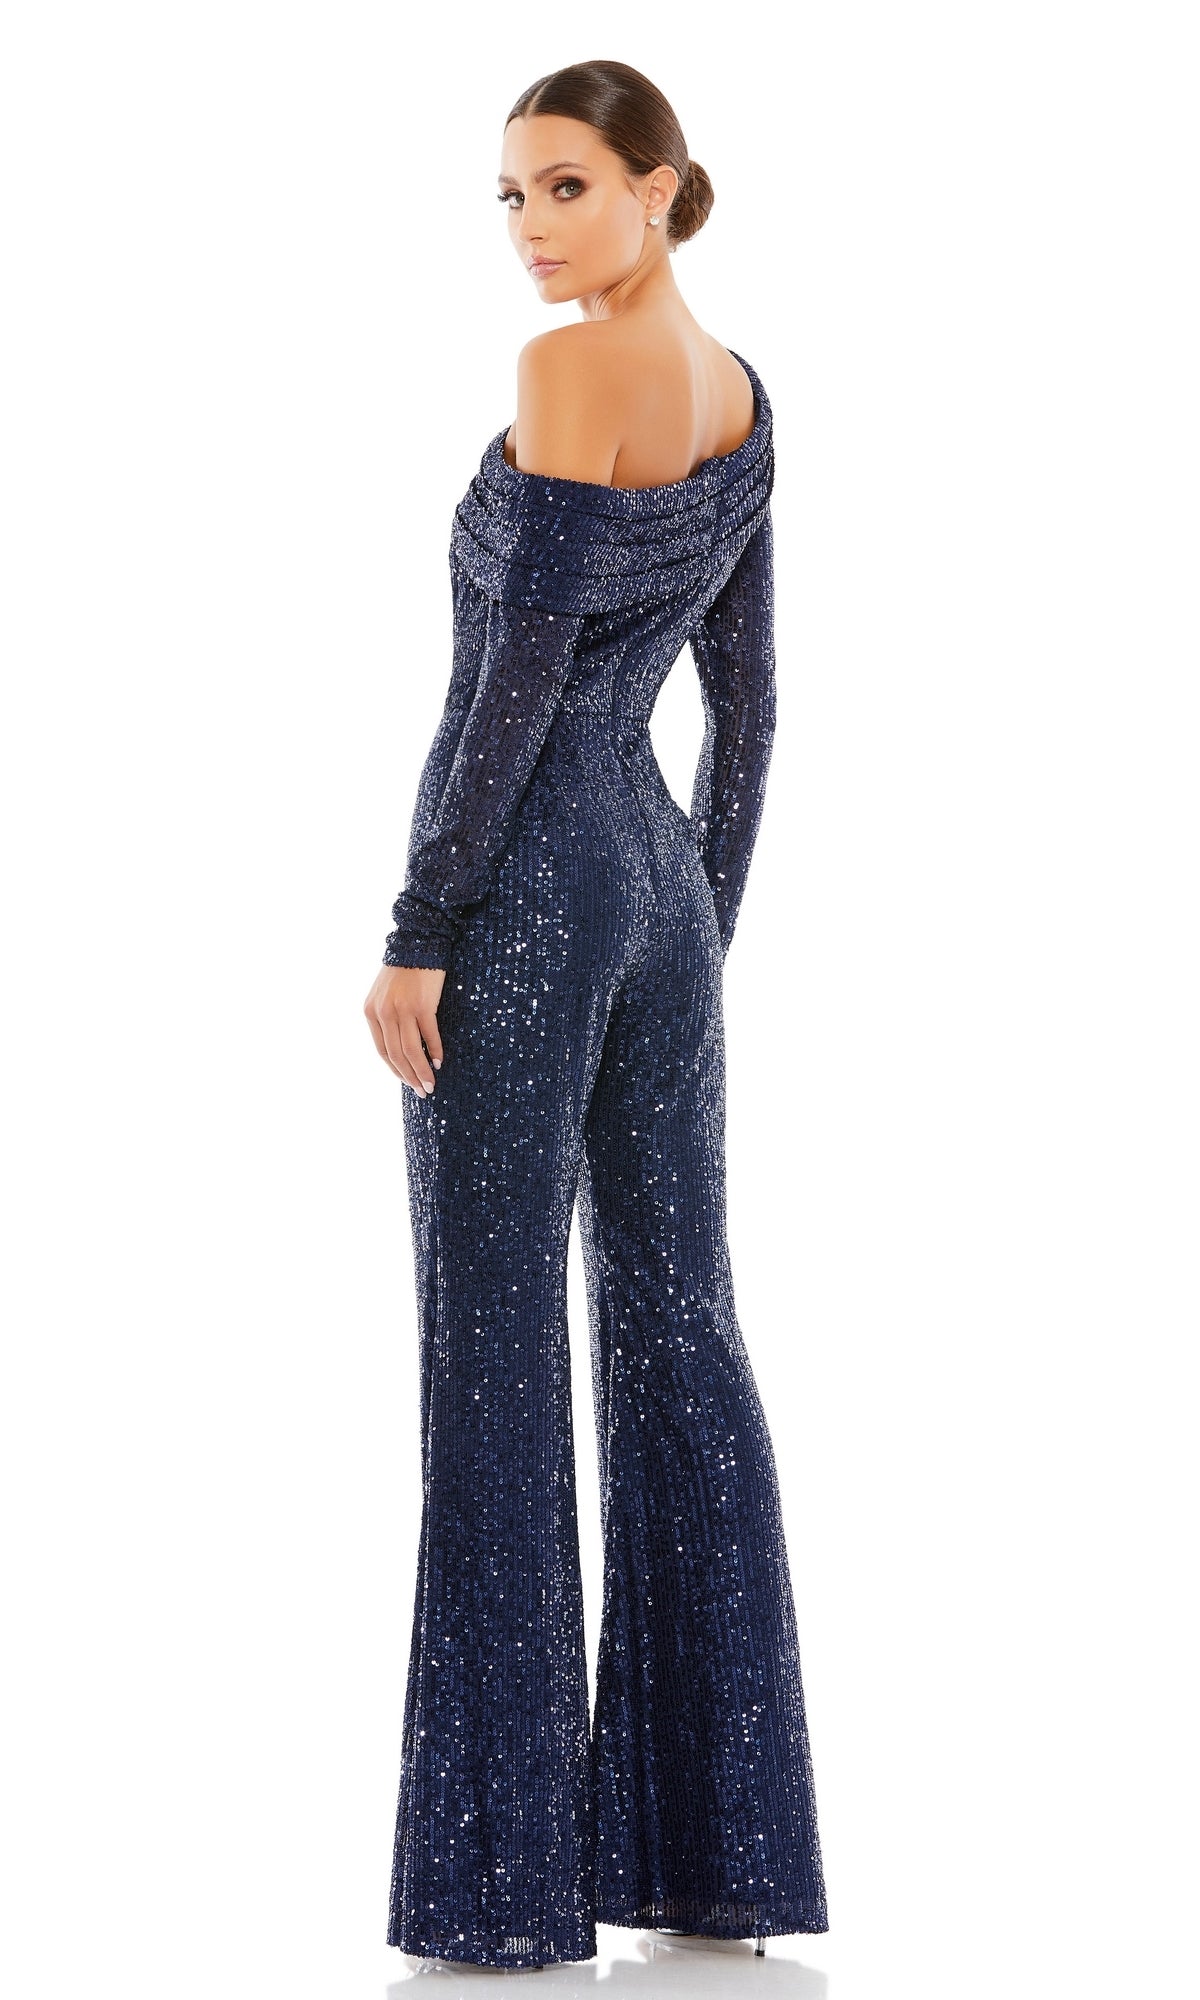 Sequin Formal Jumpsuit 26596 by Mac Duggal